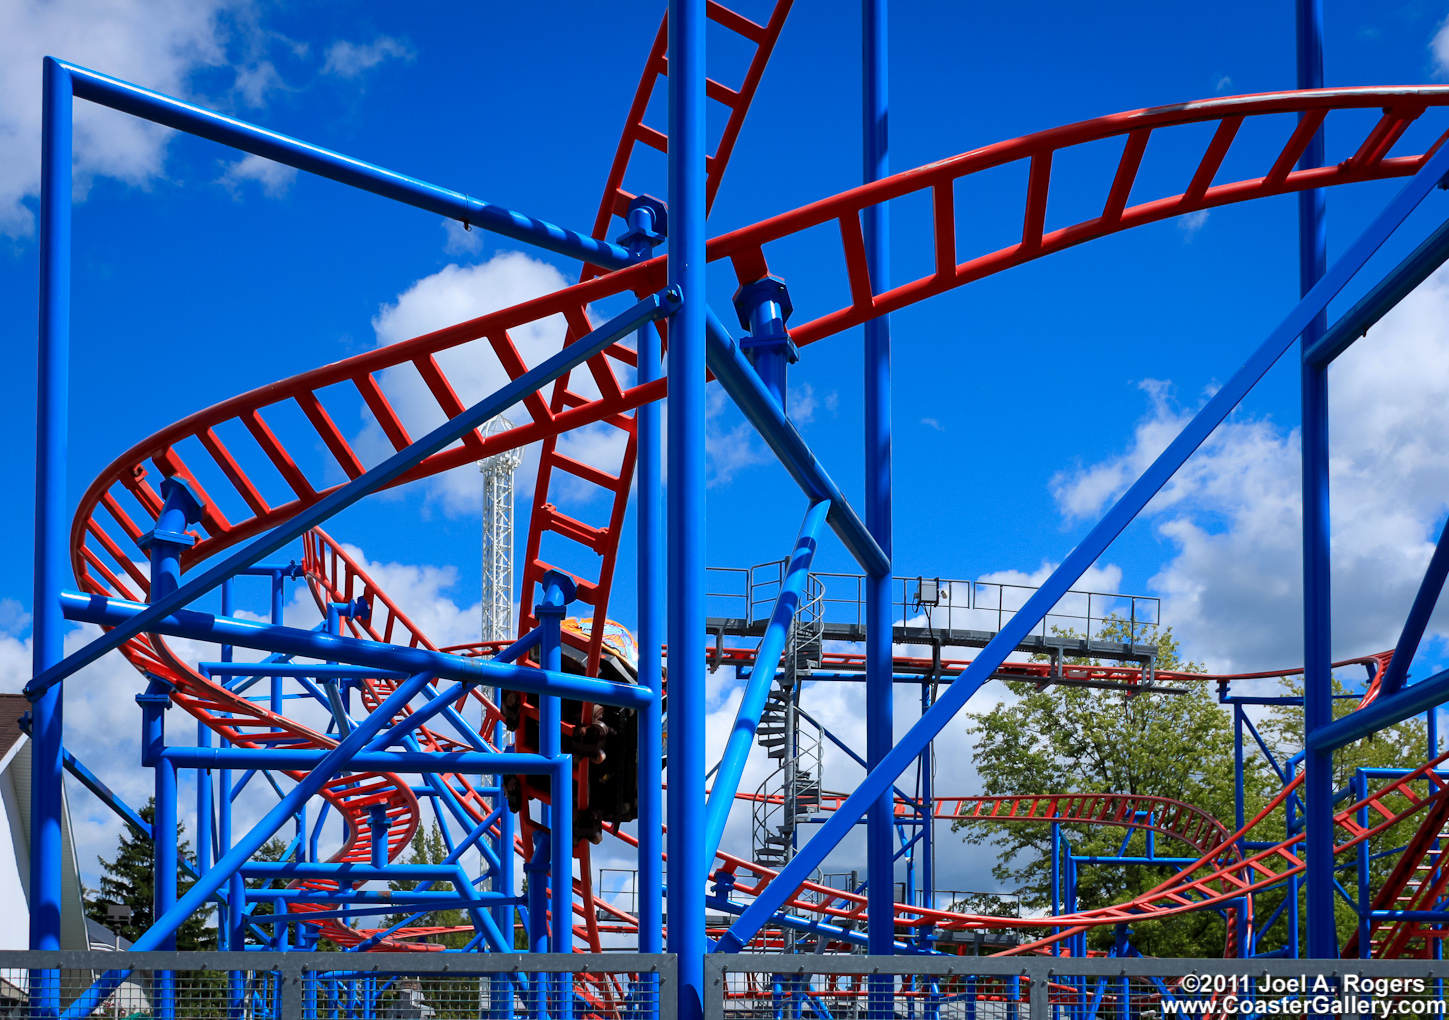 Spinning coaster built by the Maurer Sohne company